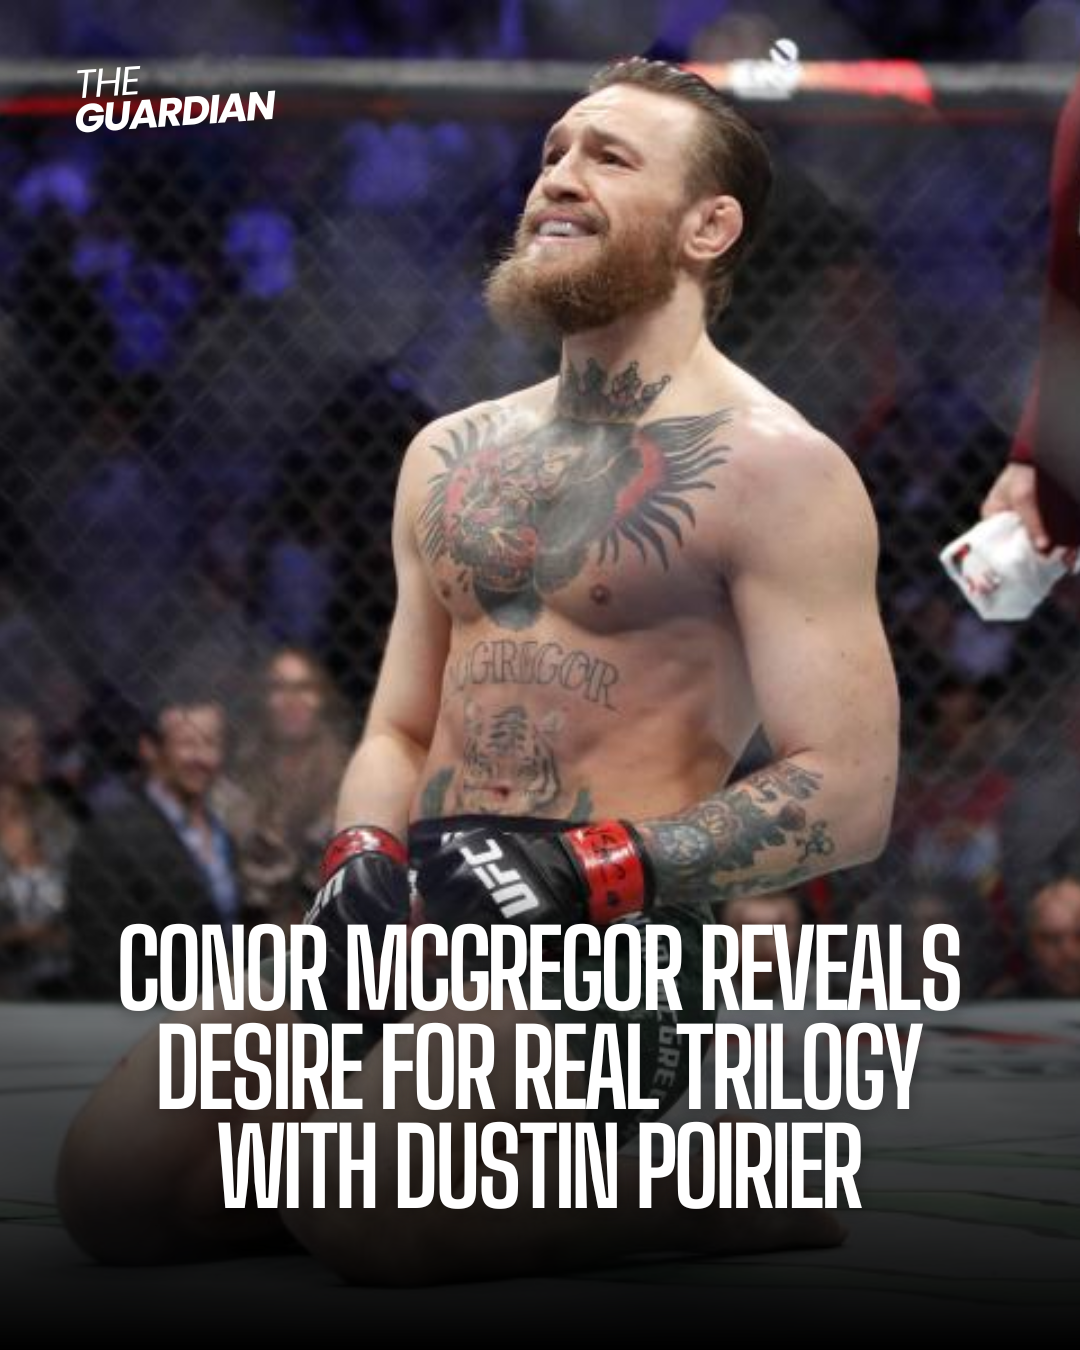 Conor McGregor, a UFC legend, has revealed a major conflict and lack of communication with UFC CEO Dana White.